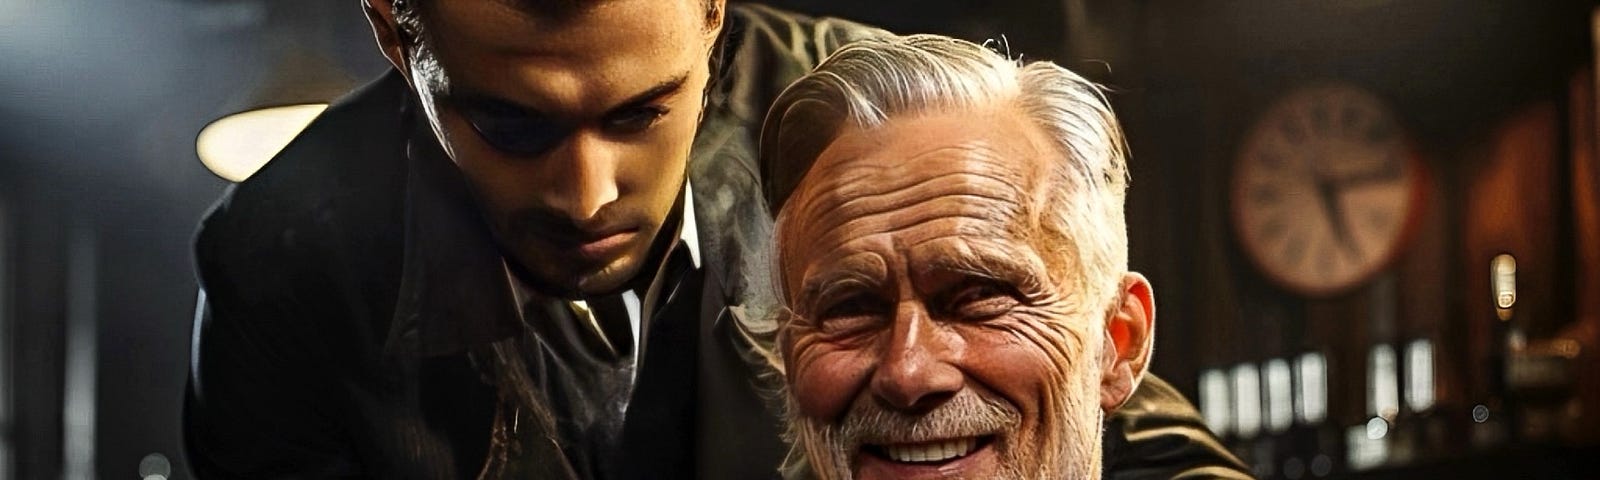 An intense moment in a barbershop captured in a cinematic photograph, where a barber, with a focused expression, holds a razor to the throat of a smiling older man discussing football, unaware of the profound internal struggle of his barber.